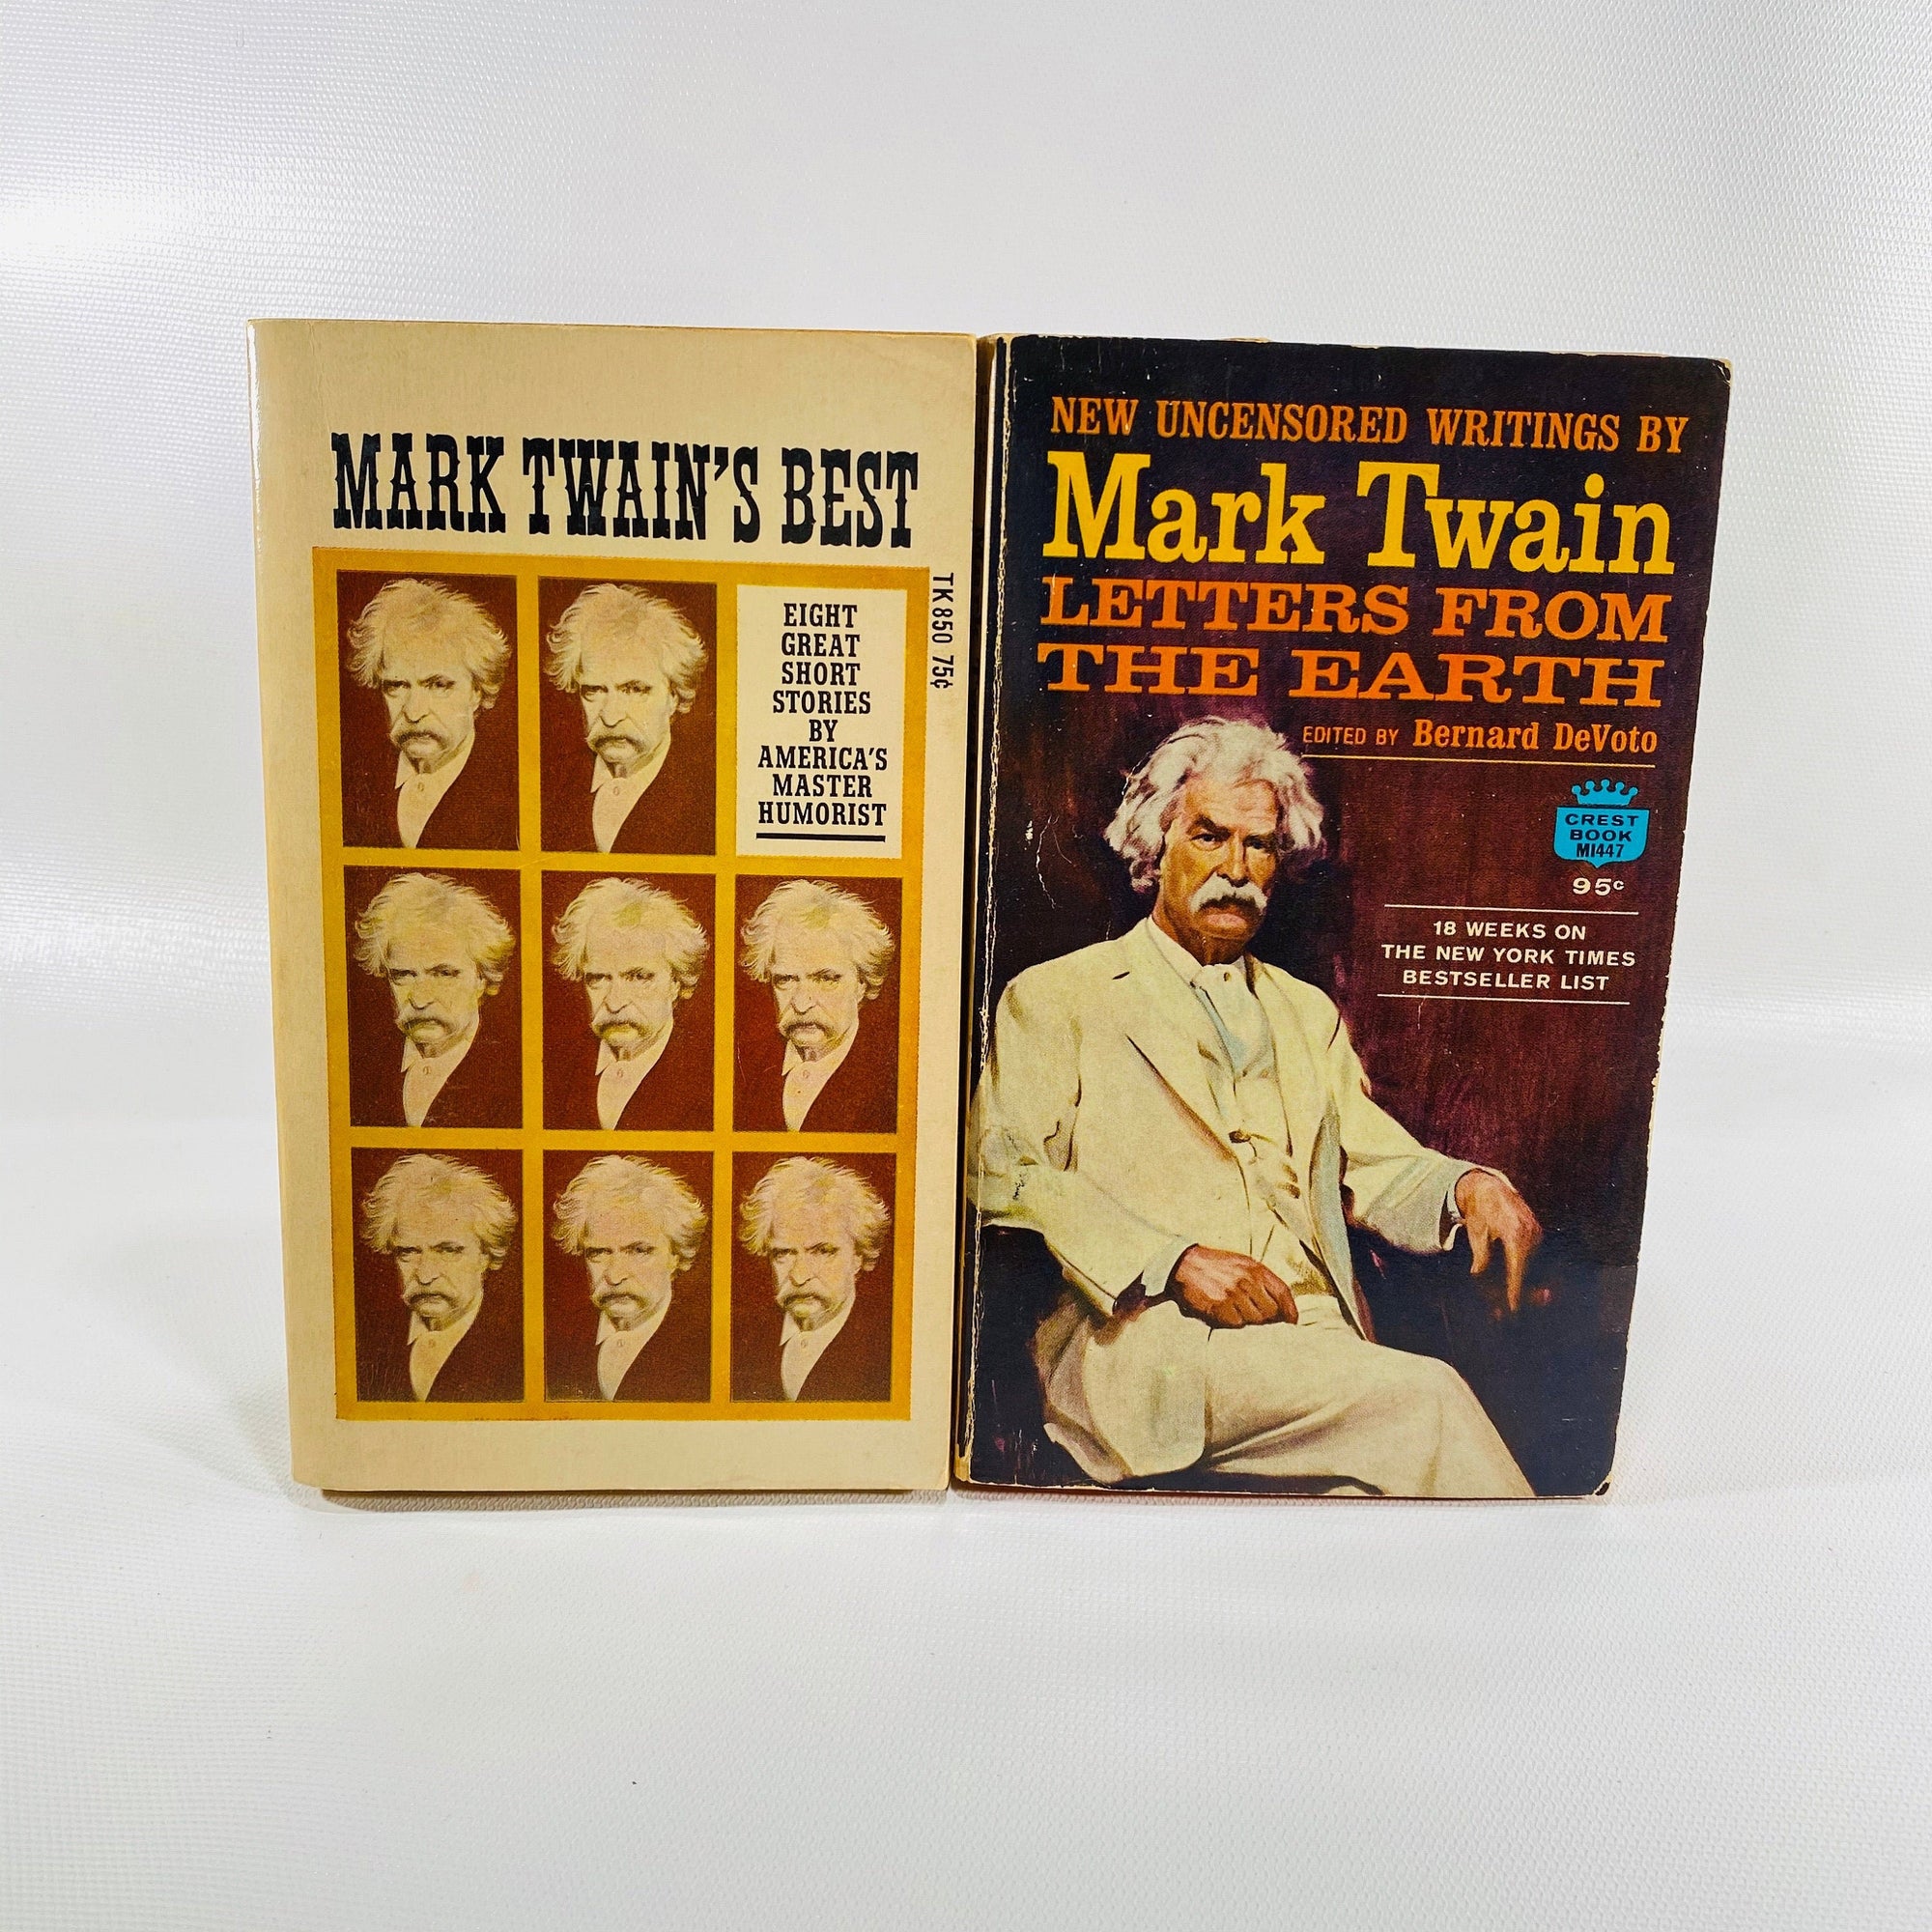 Set of Mark Twain Paperbacks Letters from the Earth and Mark Twain Best  1962